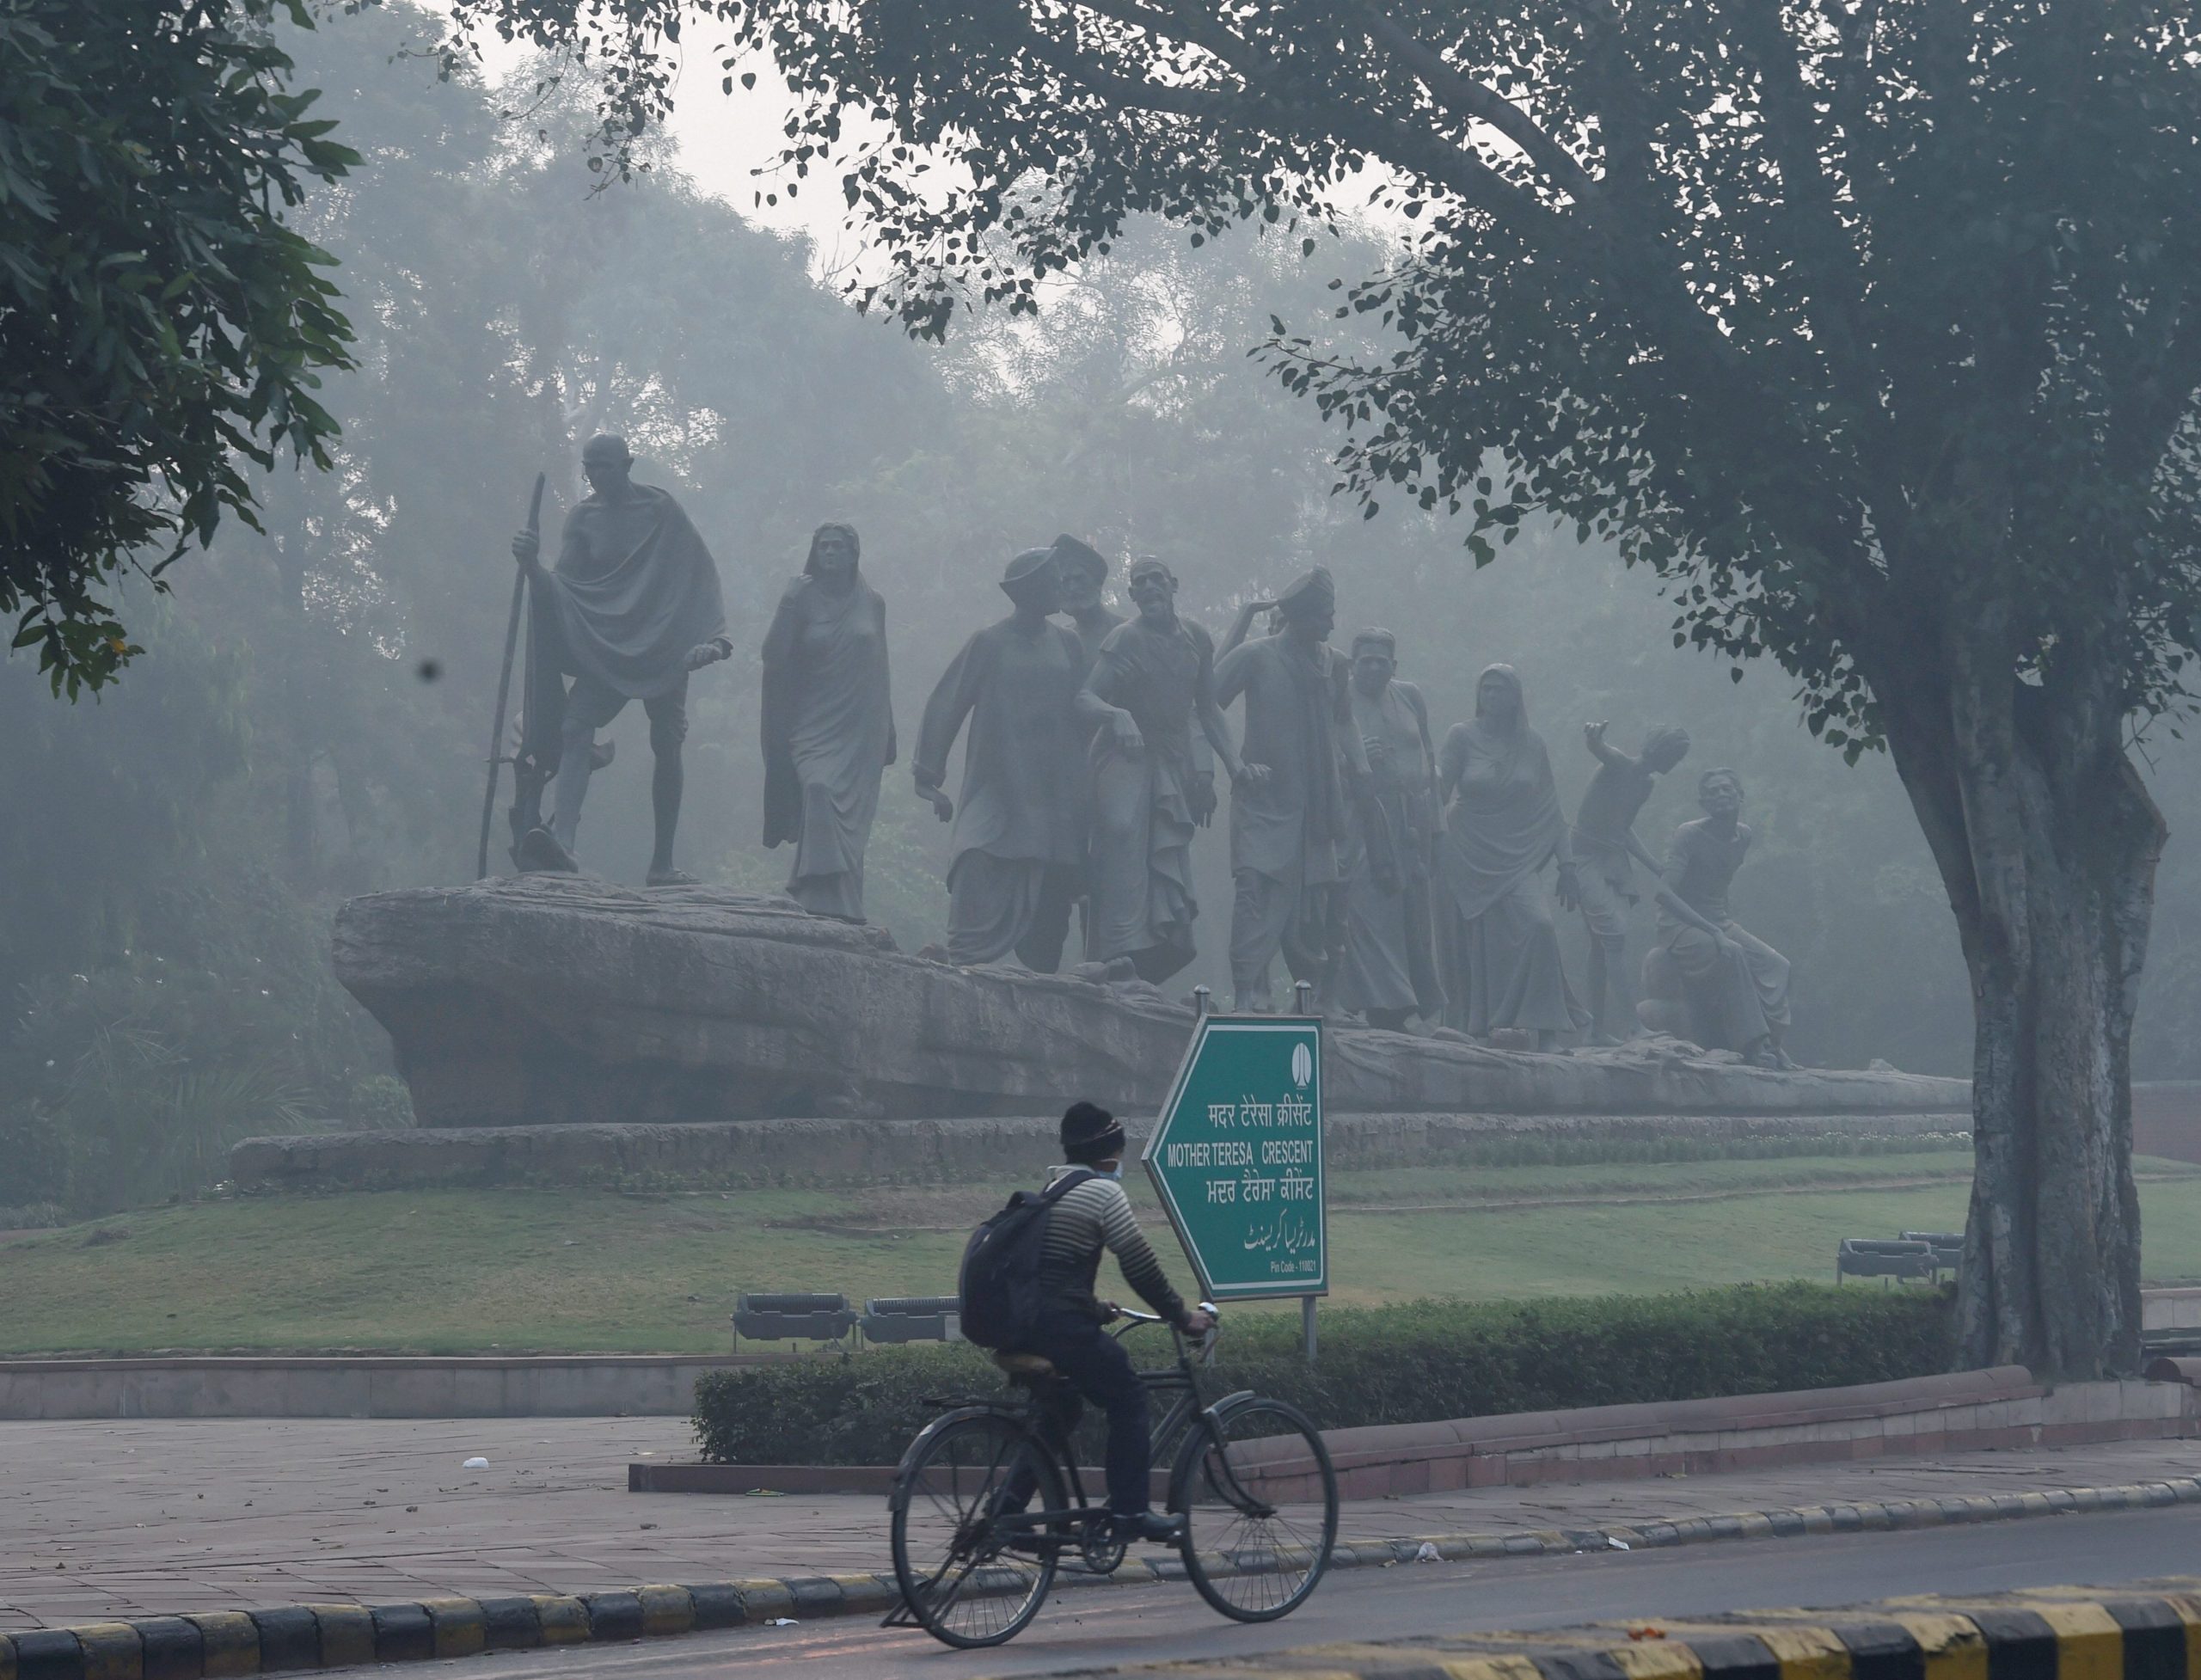 Why is Delhi facing repeated air pollution problems?